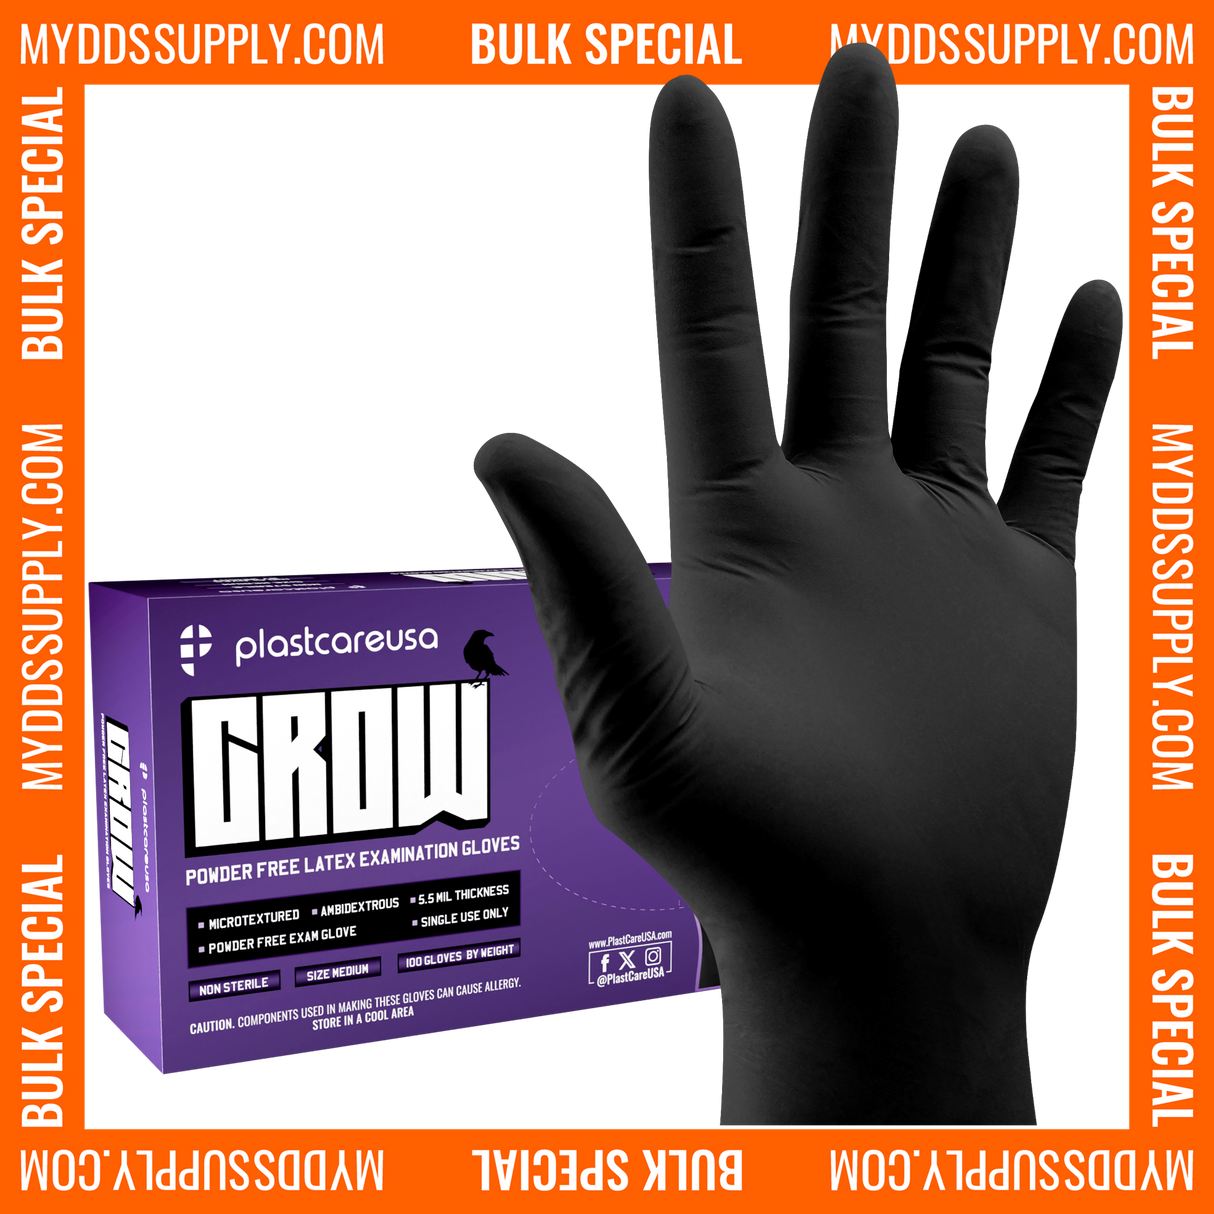 6000 Extra Large XL PlastCare USA Black Latex Gloves (60 Boxes) *Bulk Special*